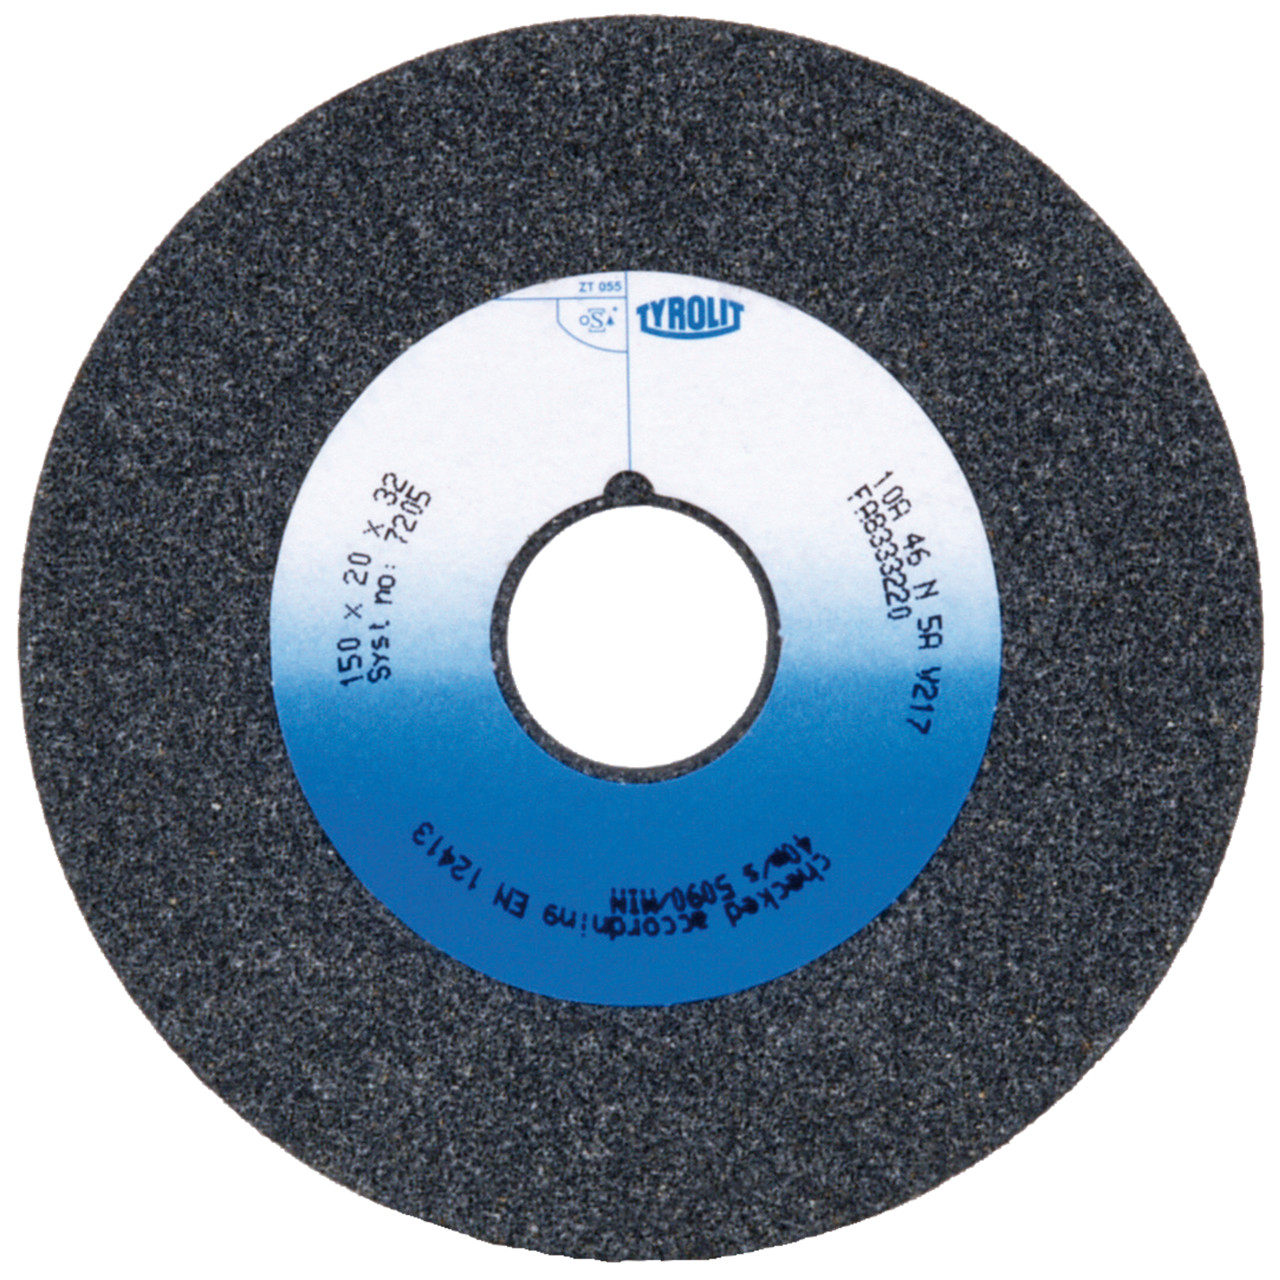 TYROLIT conventional ceramic grinding wheels DxDxH 300x40x51 For unalloyed and low-alloy steels, shape: 1, Art. 110032